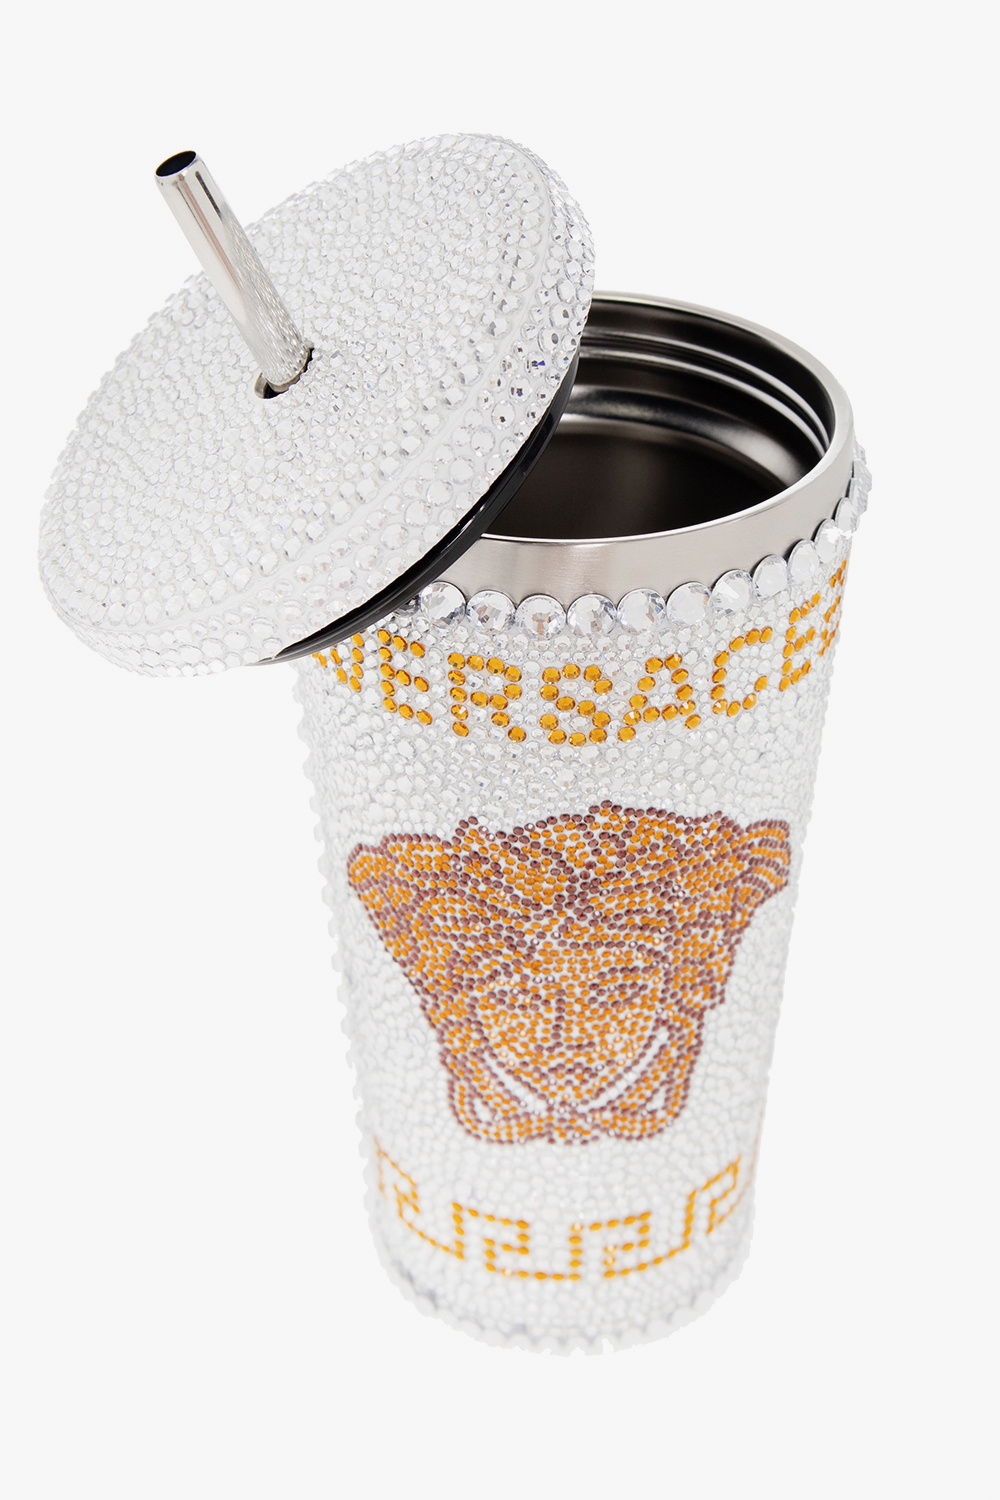 Versace Home Travel cup with Medusa head